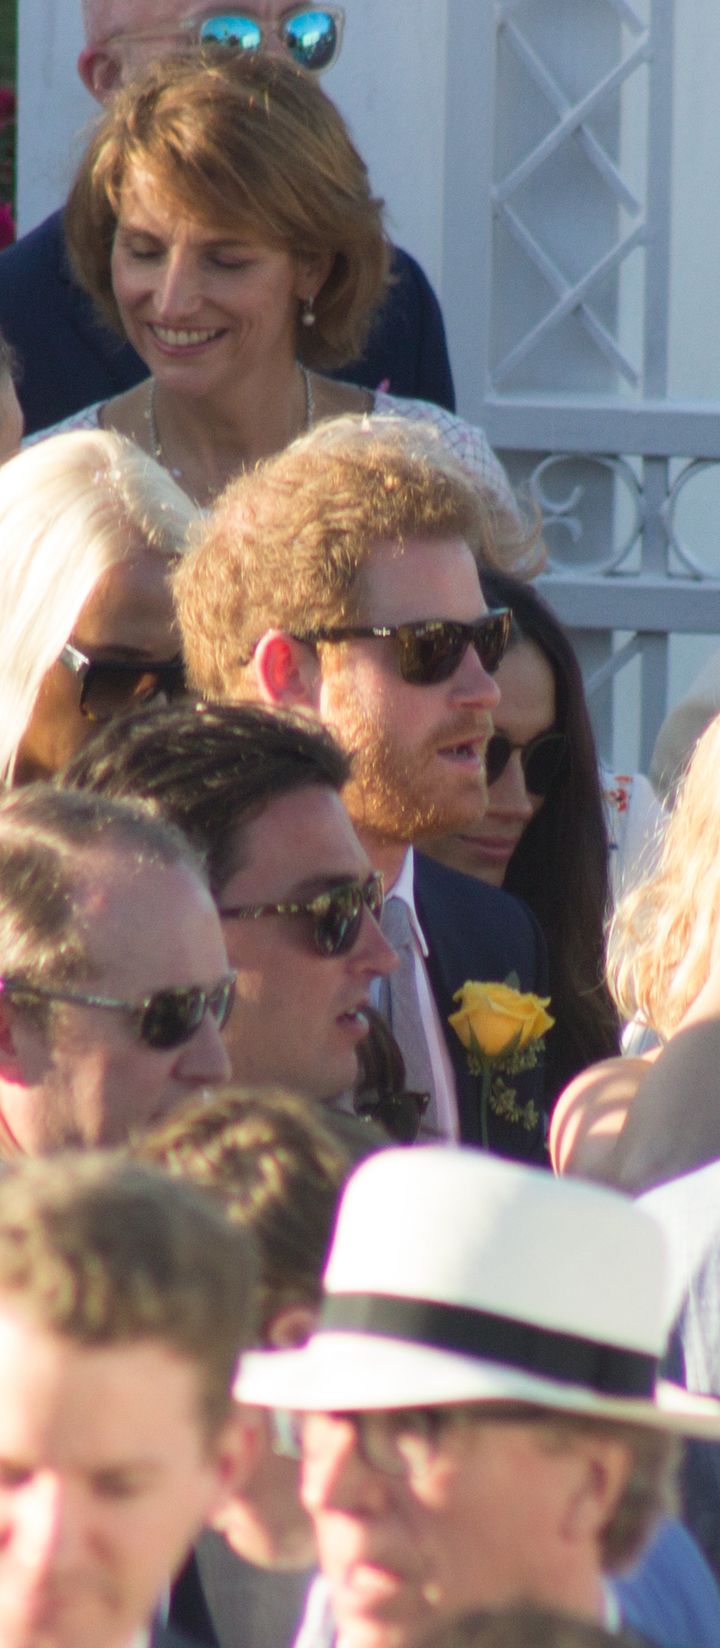 The prince sported shades and a little scruff.